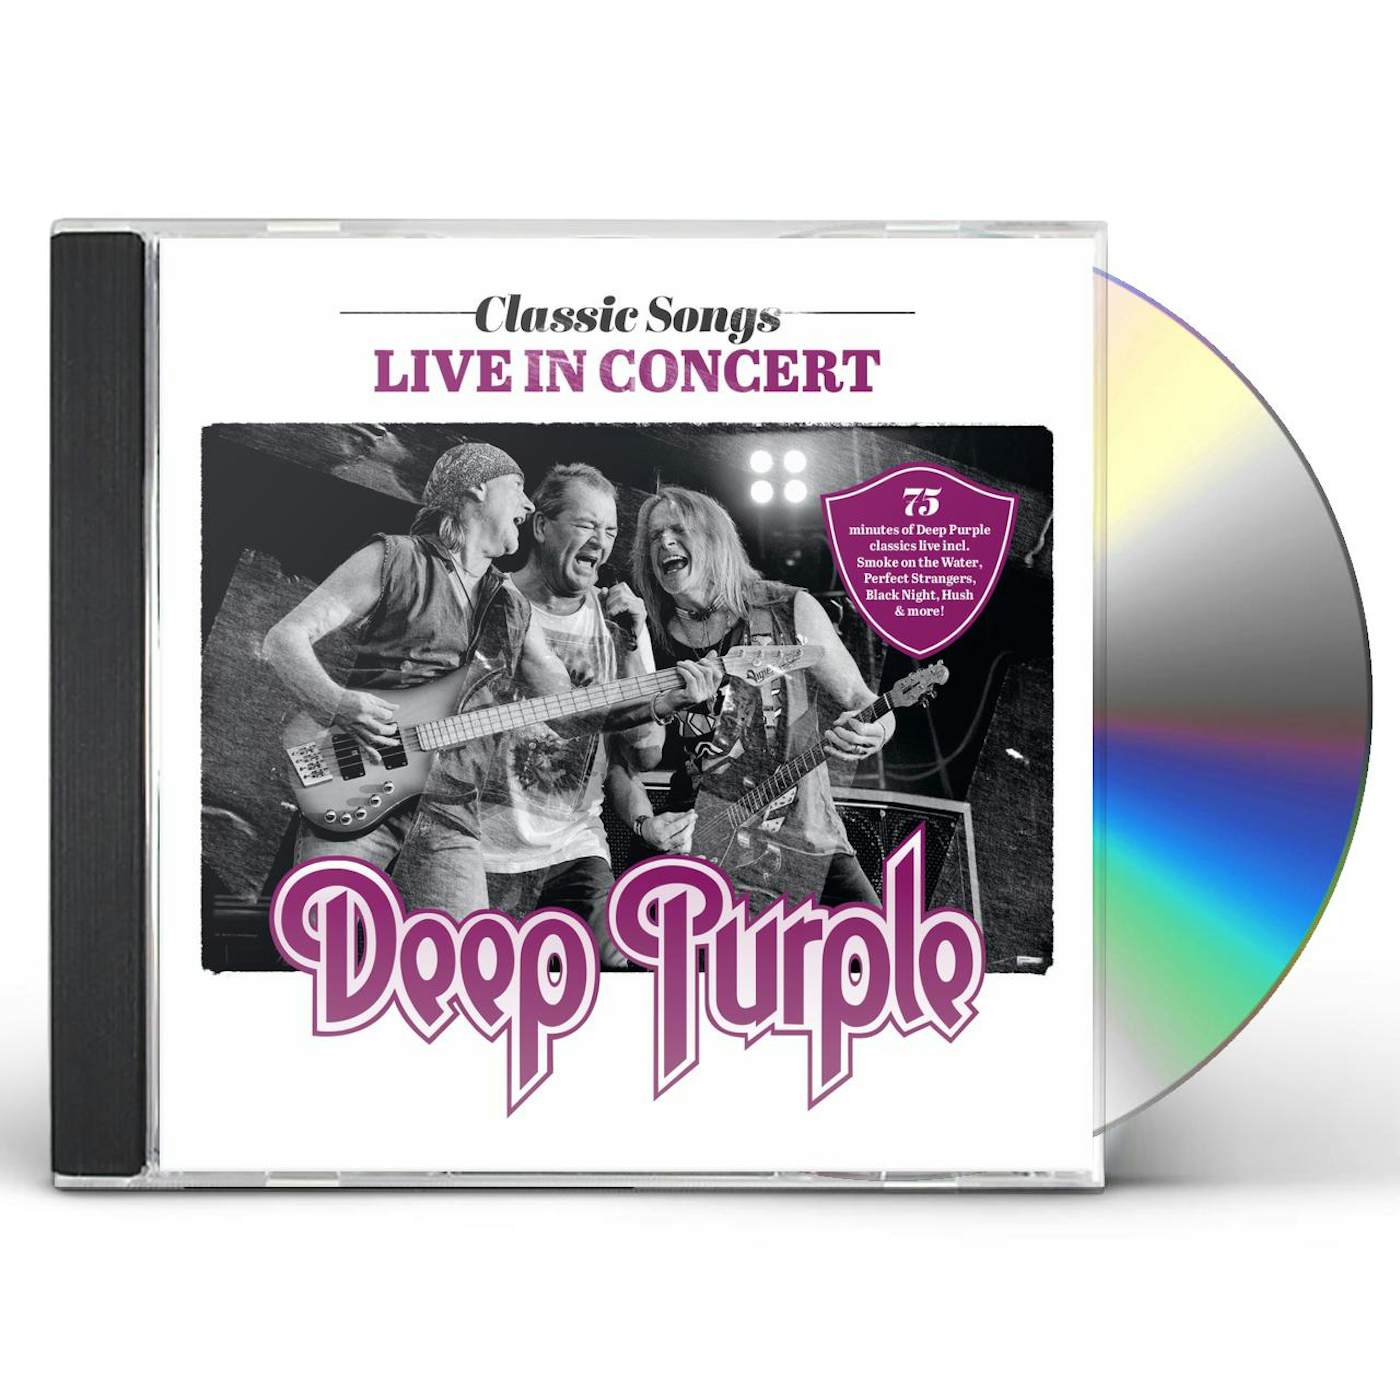 Deep Purple CLASSIC SONGS LIVE IN CONCERT CD